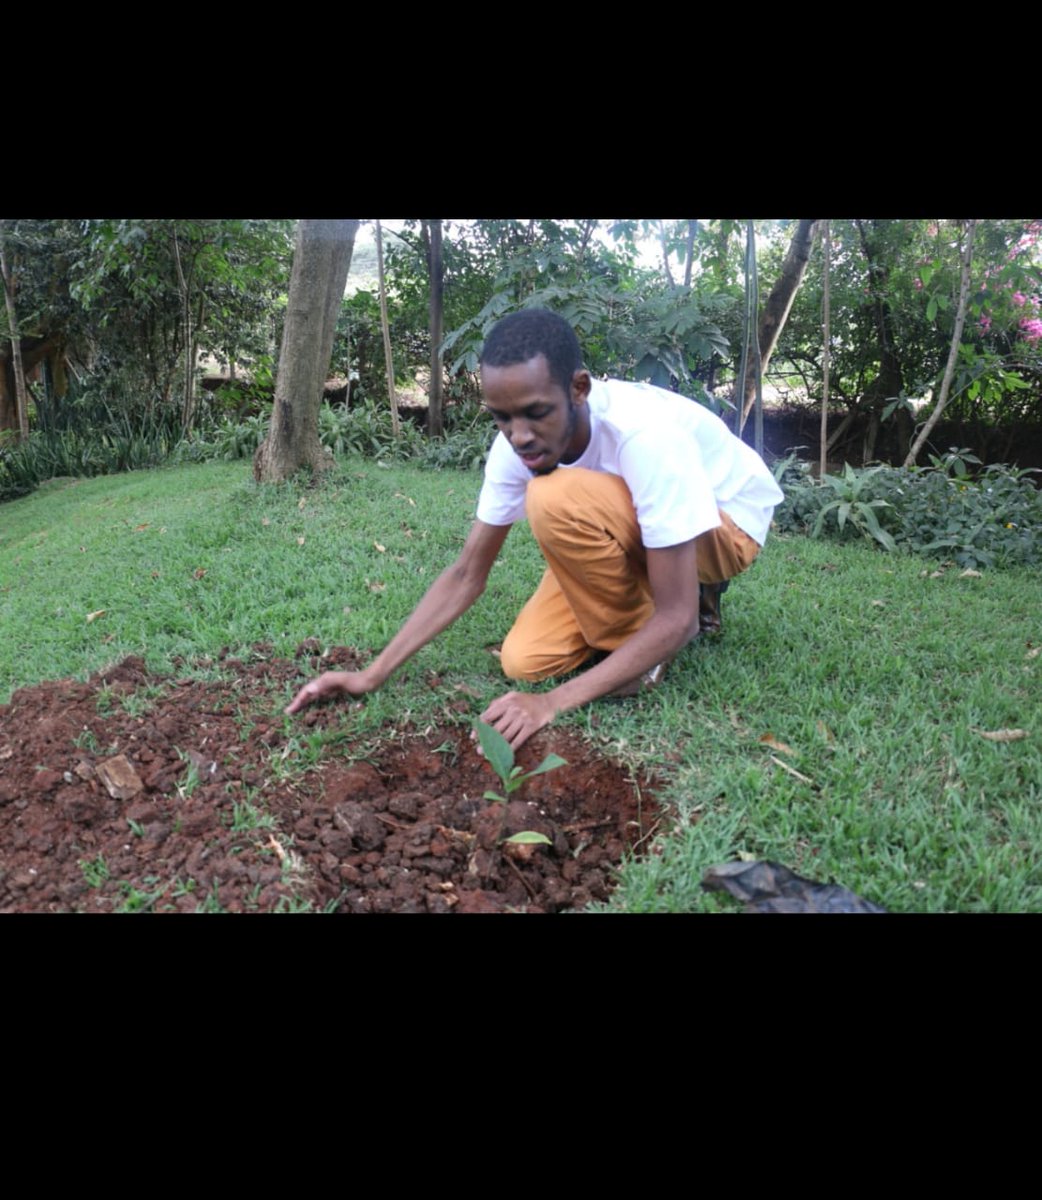 this is Judemigz ,a young passionate environmentalist who is doing more than what you can see, from my own point of view i see him strengthening the water catchment area ,what do you see ??? #environment @JudeMigz @amuhoyi_c @EstherJoyrell @LuciaMutheu5 @lishashashasha @lishywk